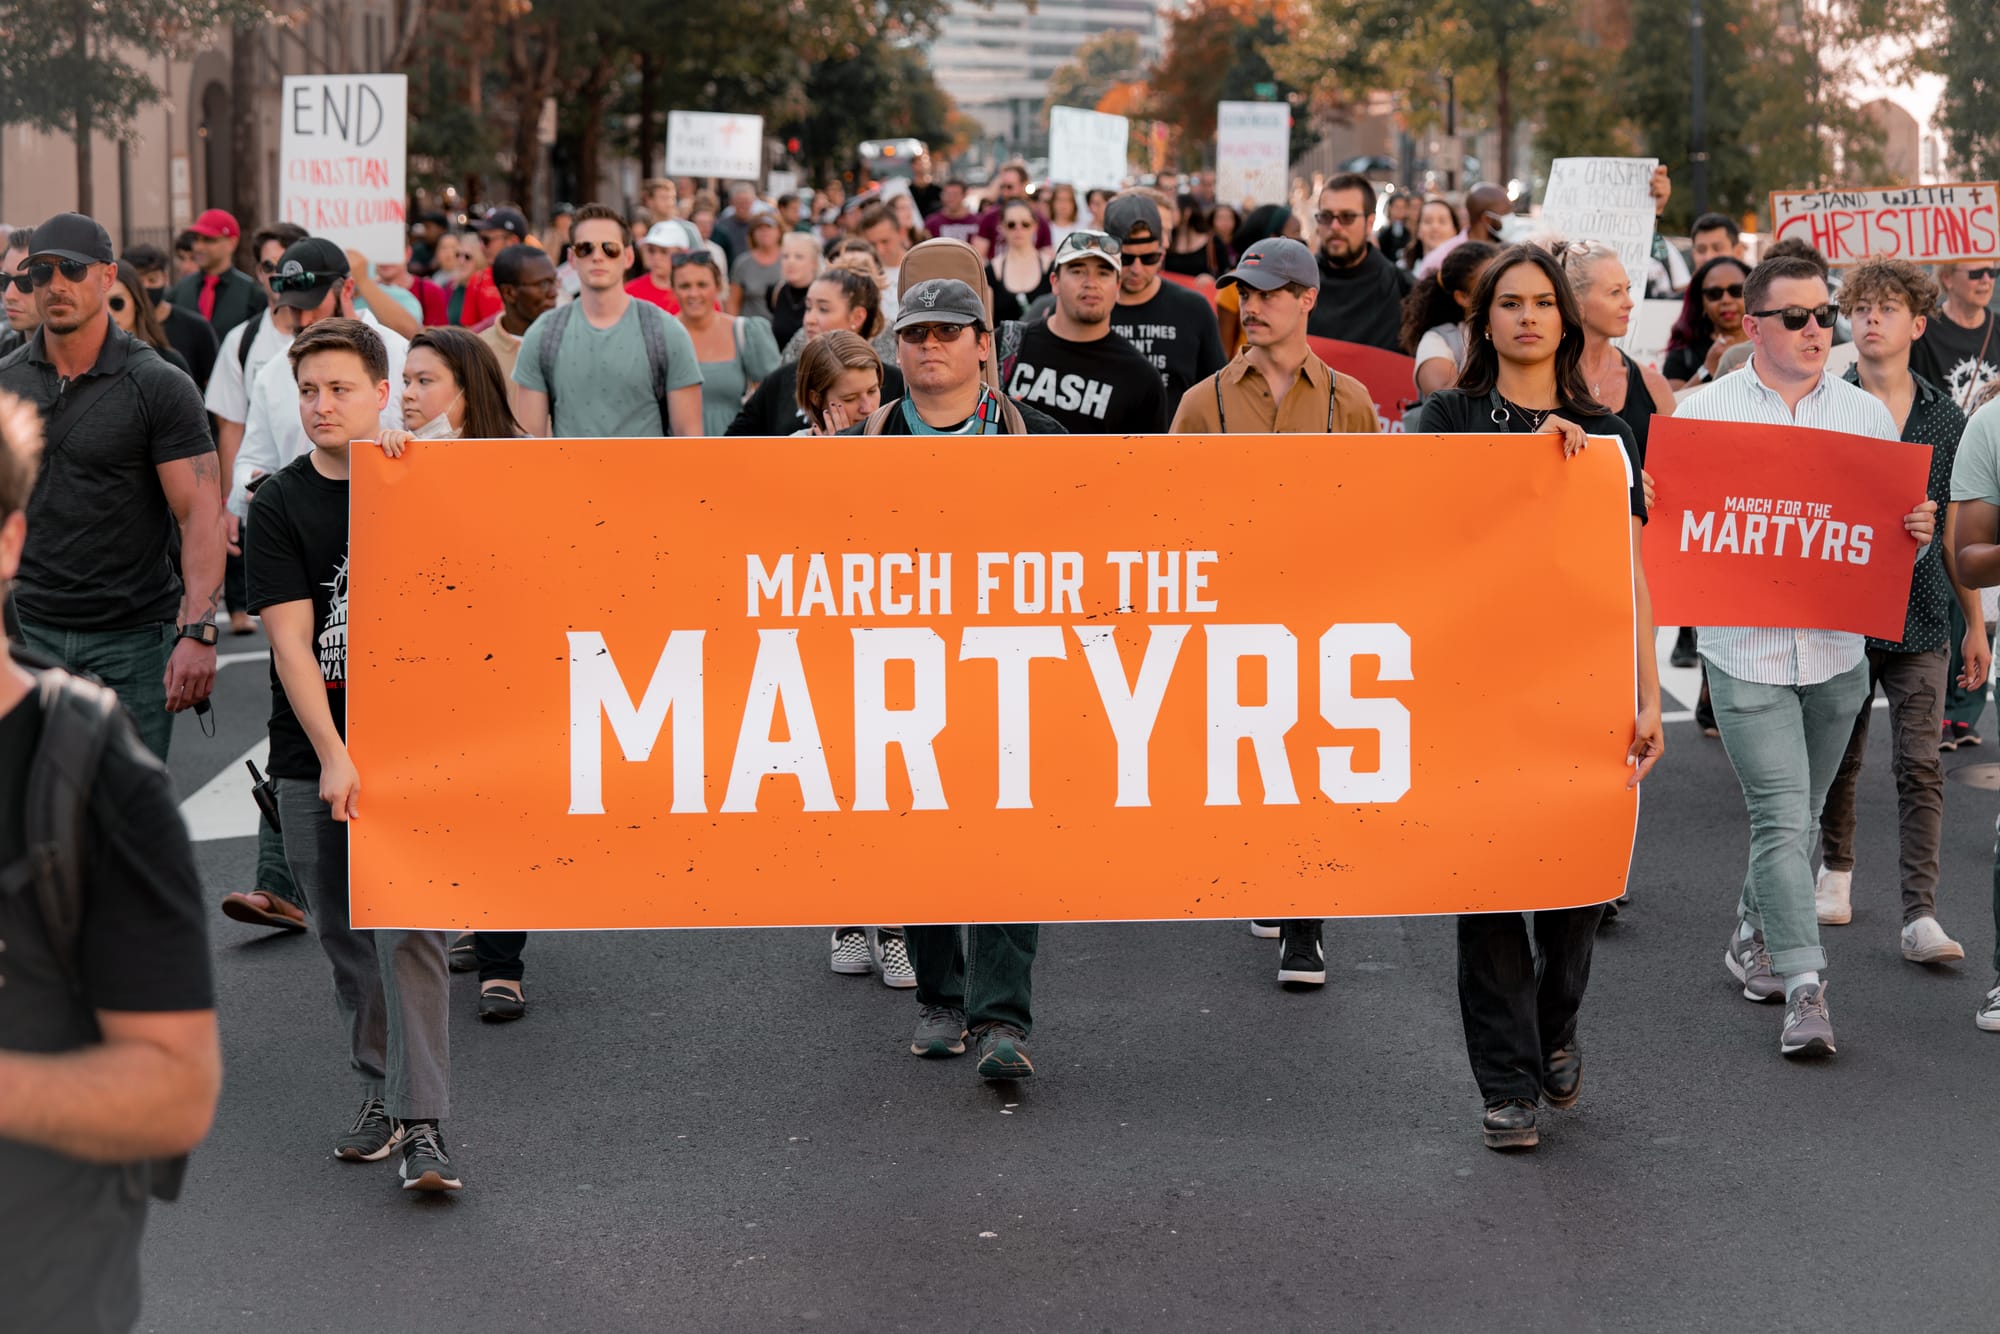 March for the Martyrs to Rally for Persecuted Christians with Jim Caviezel as Keynote Speaker in Washington, D.C.